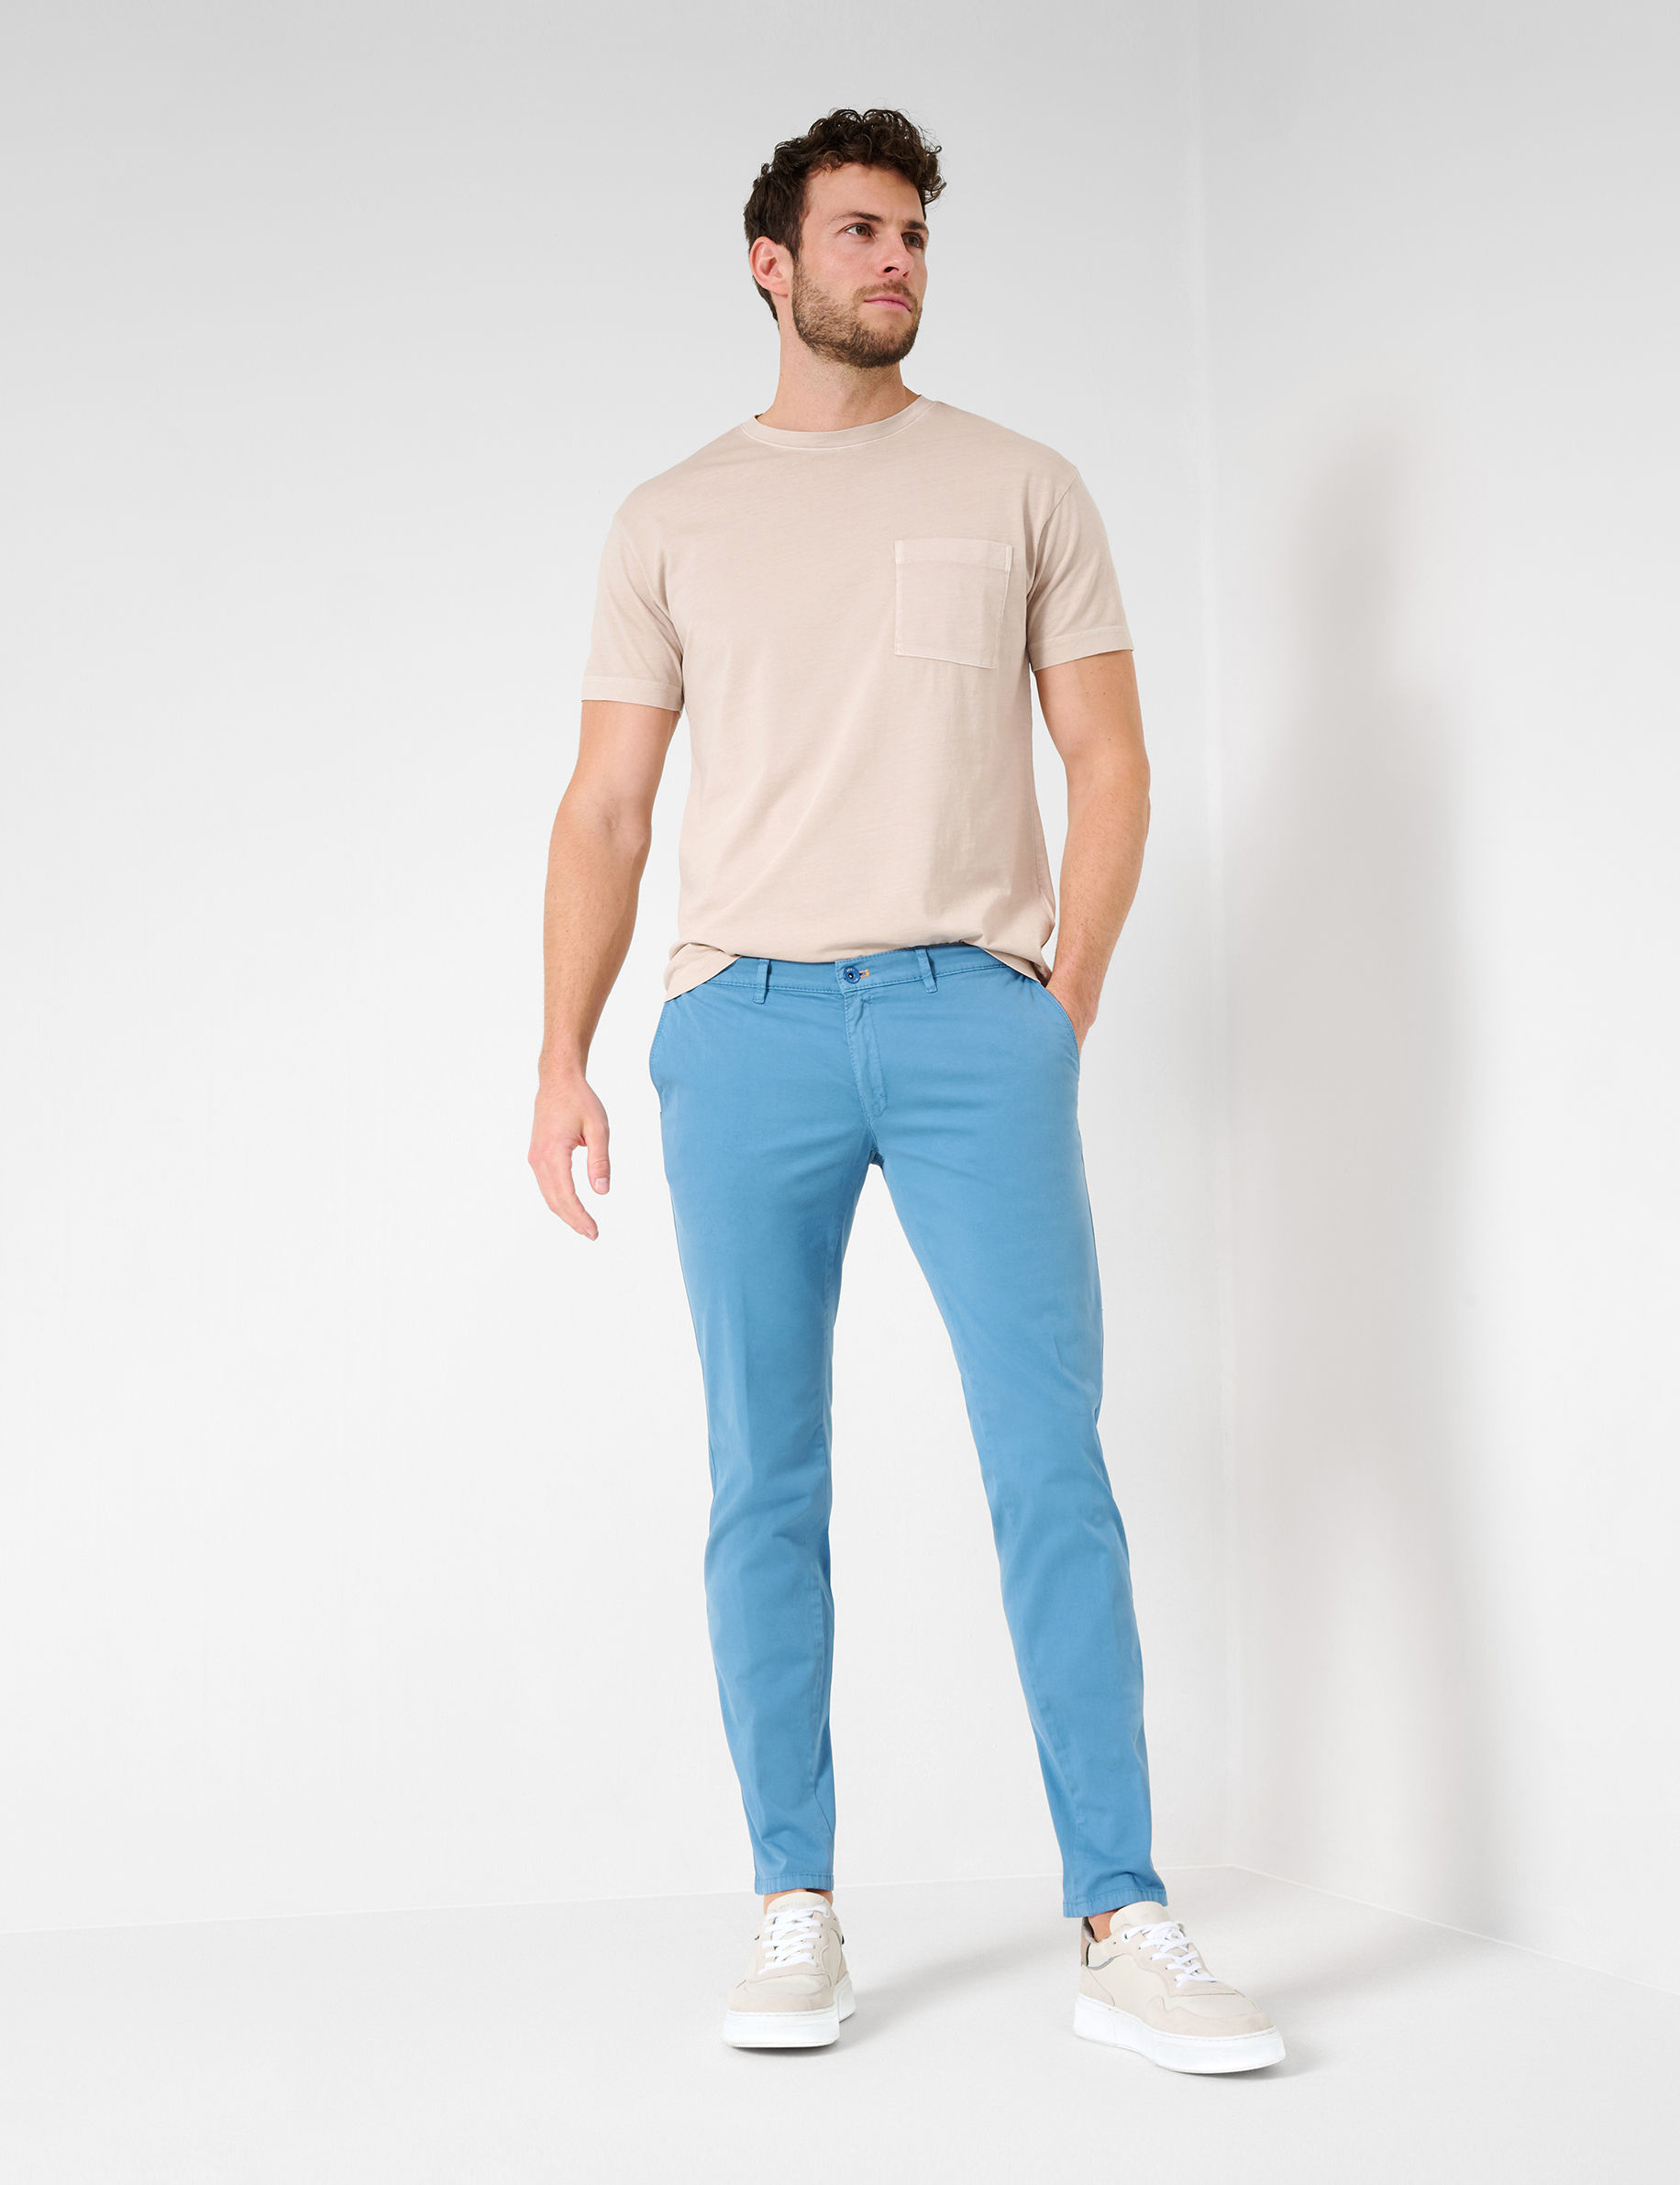 Men Style SILVIO DUSTY BLUE Slim Fit Model Outfit